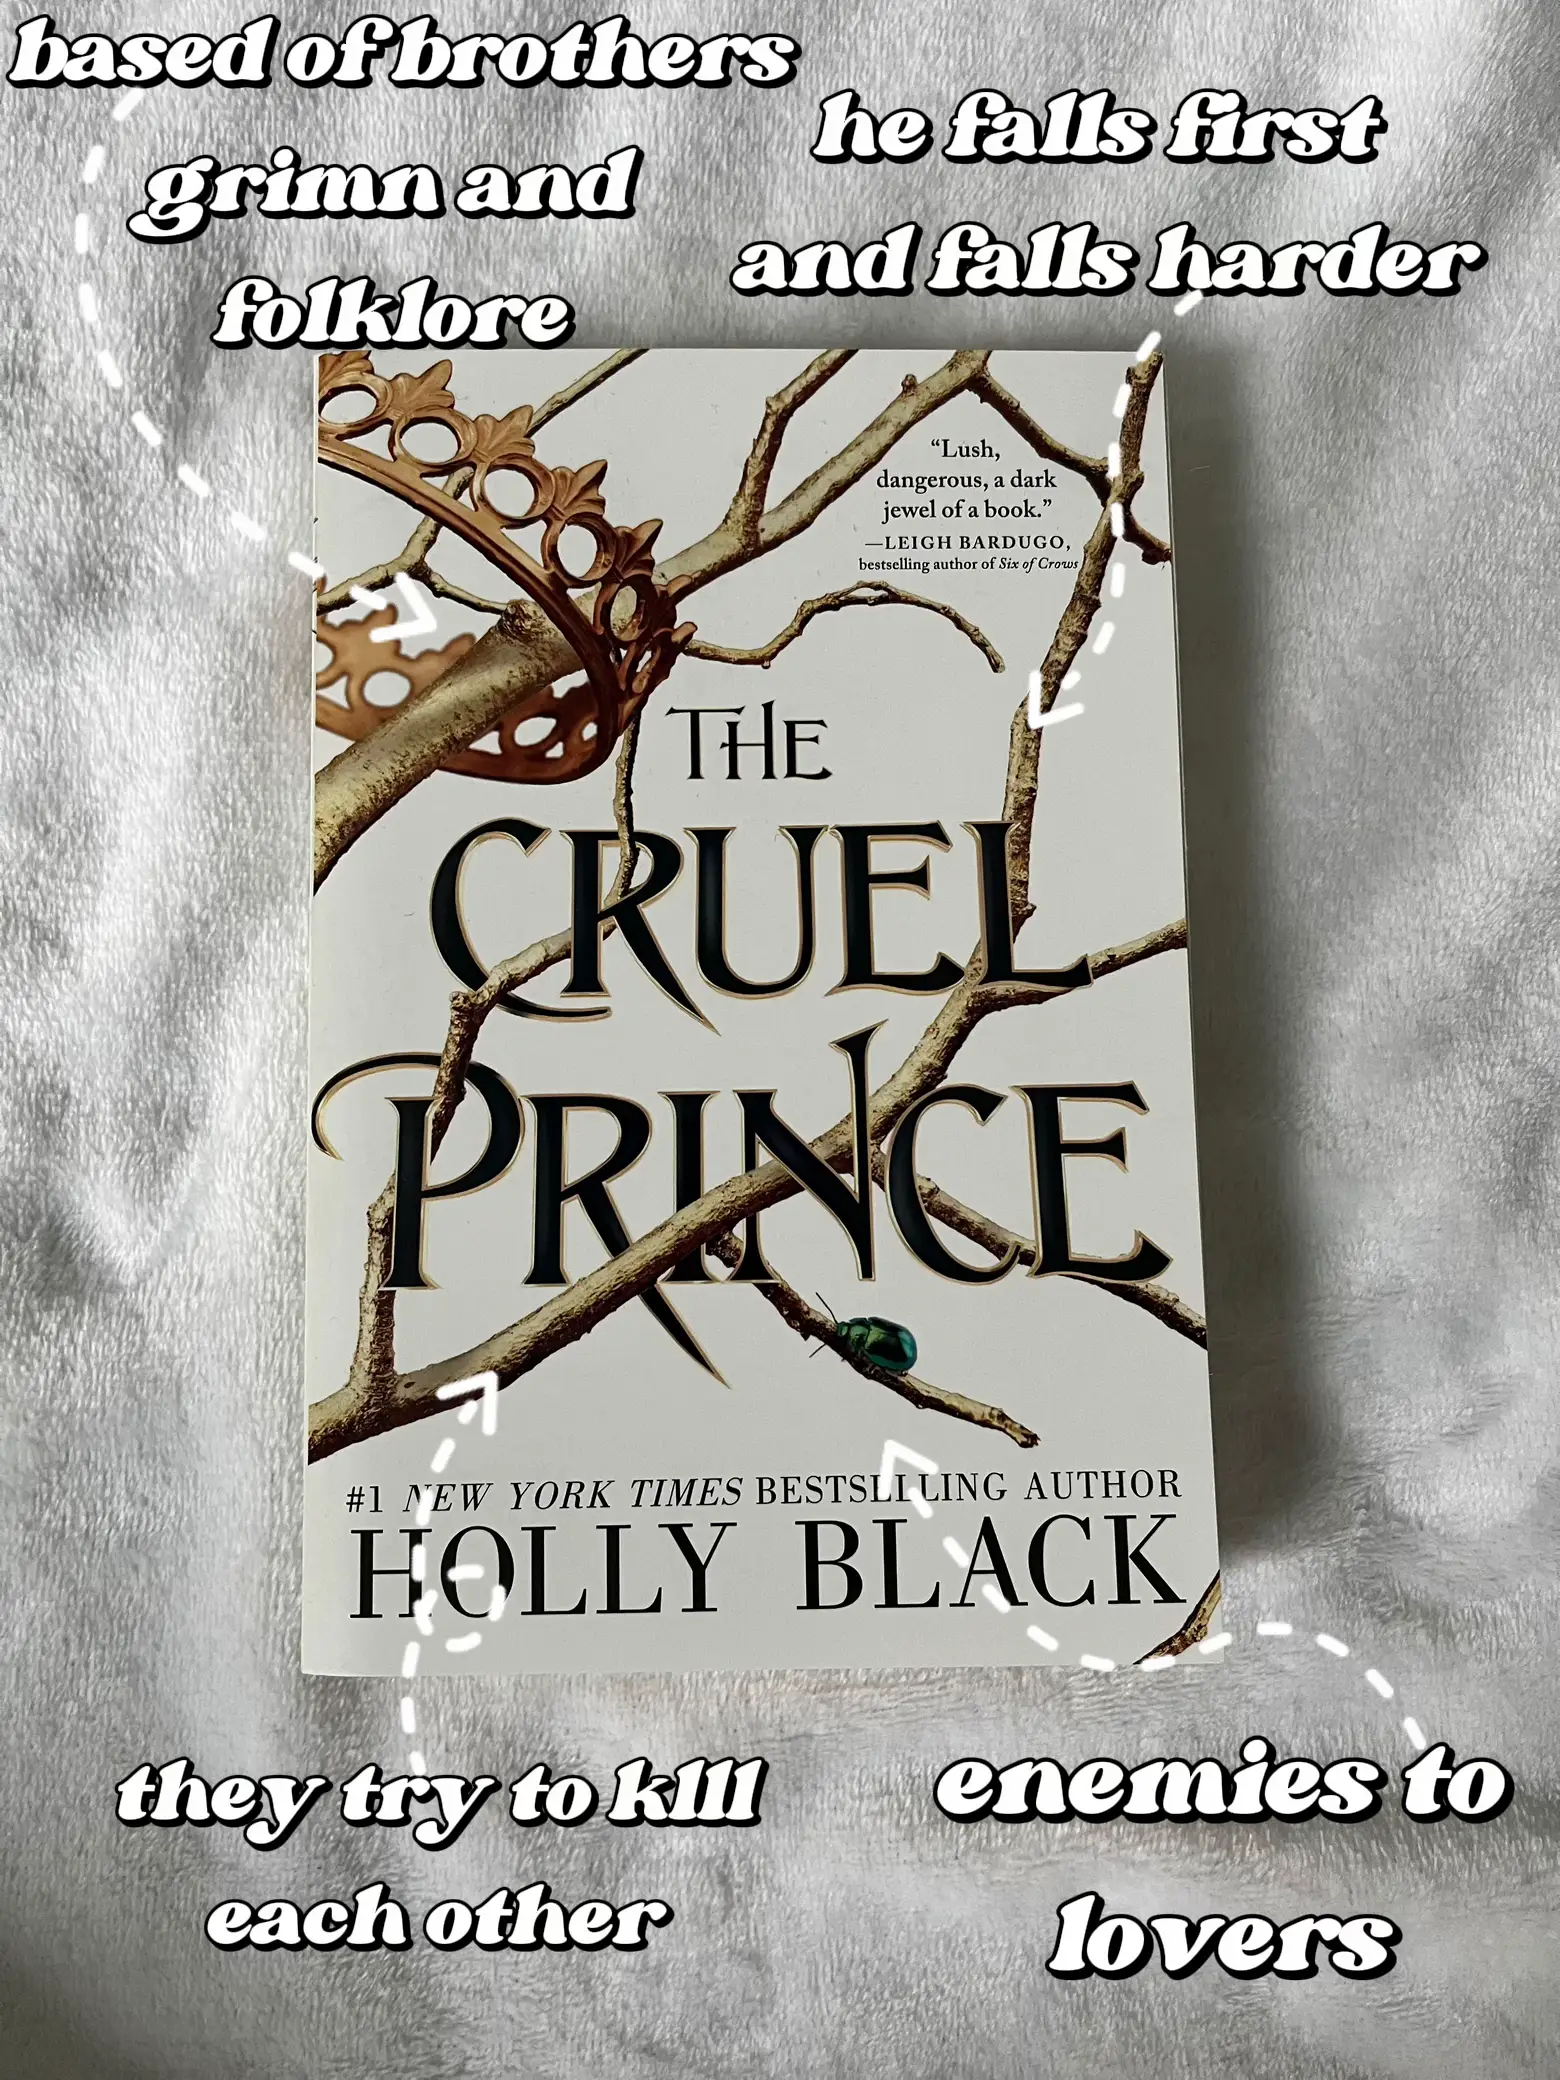  A book cover with a branch on it called The Cruel Prince.